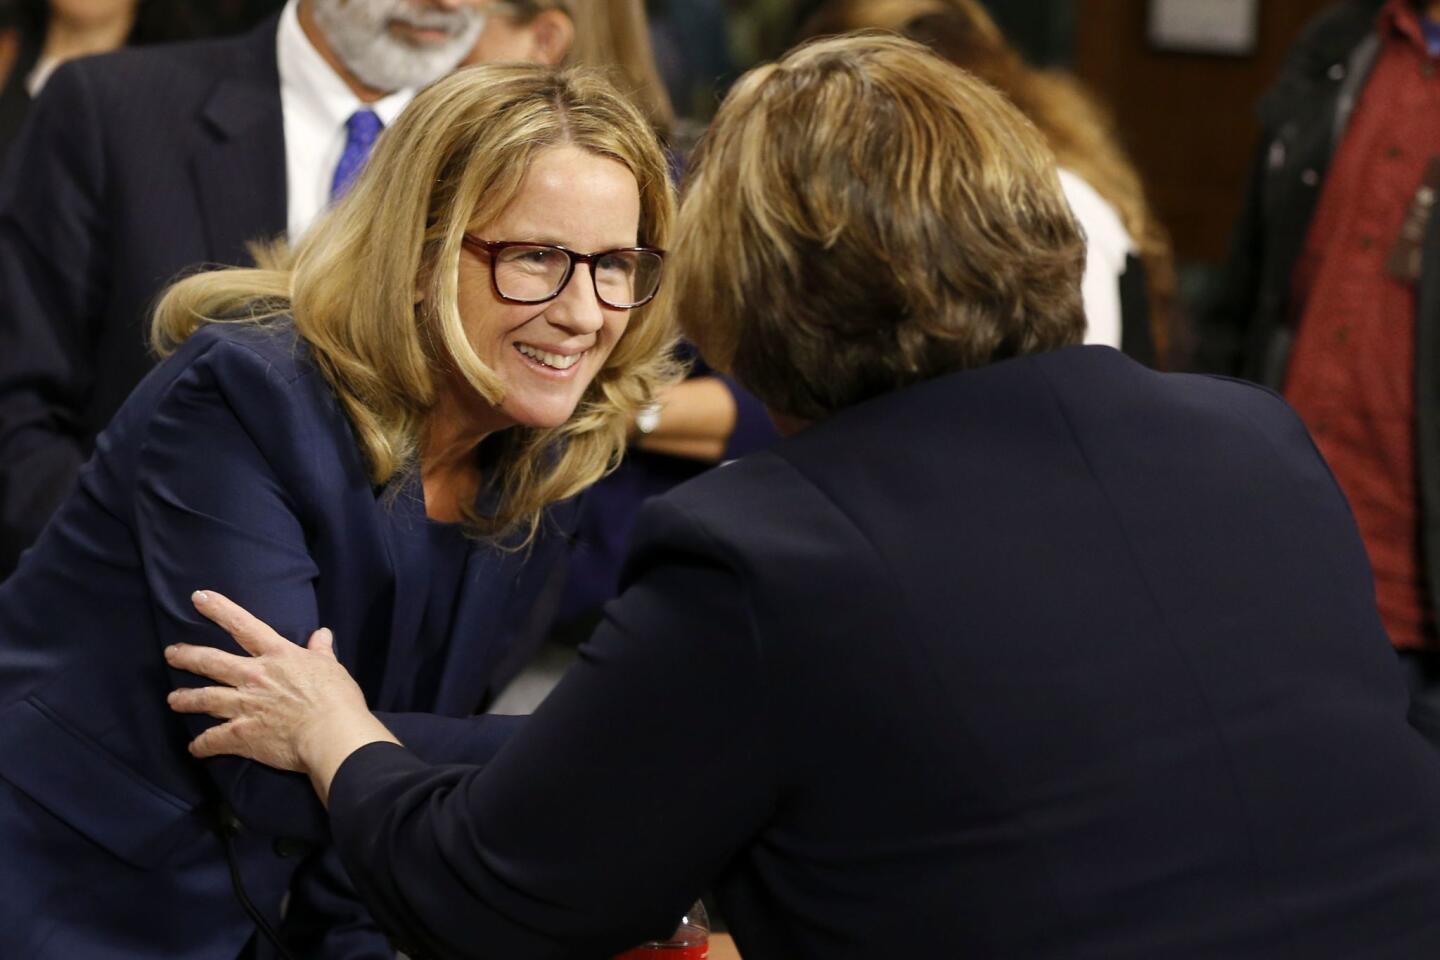 Dr. Christine Blasey Ford shakes hands with attorney Debra Katz after the Senate Judiciary Committee hearing on the nomination of Brett Kavanaugh to be an associate justice of the Supreme Court of the United States, on Capitol Hill.